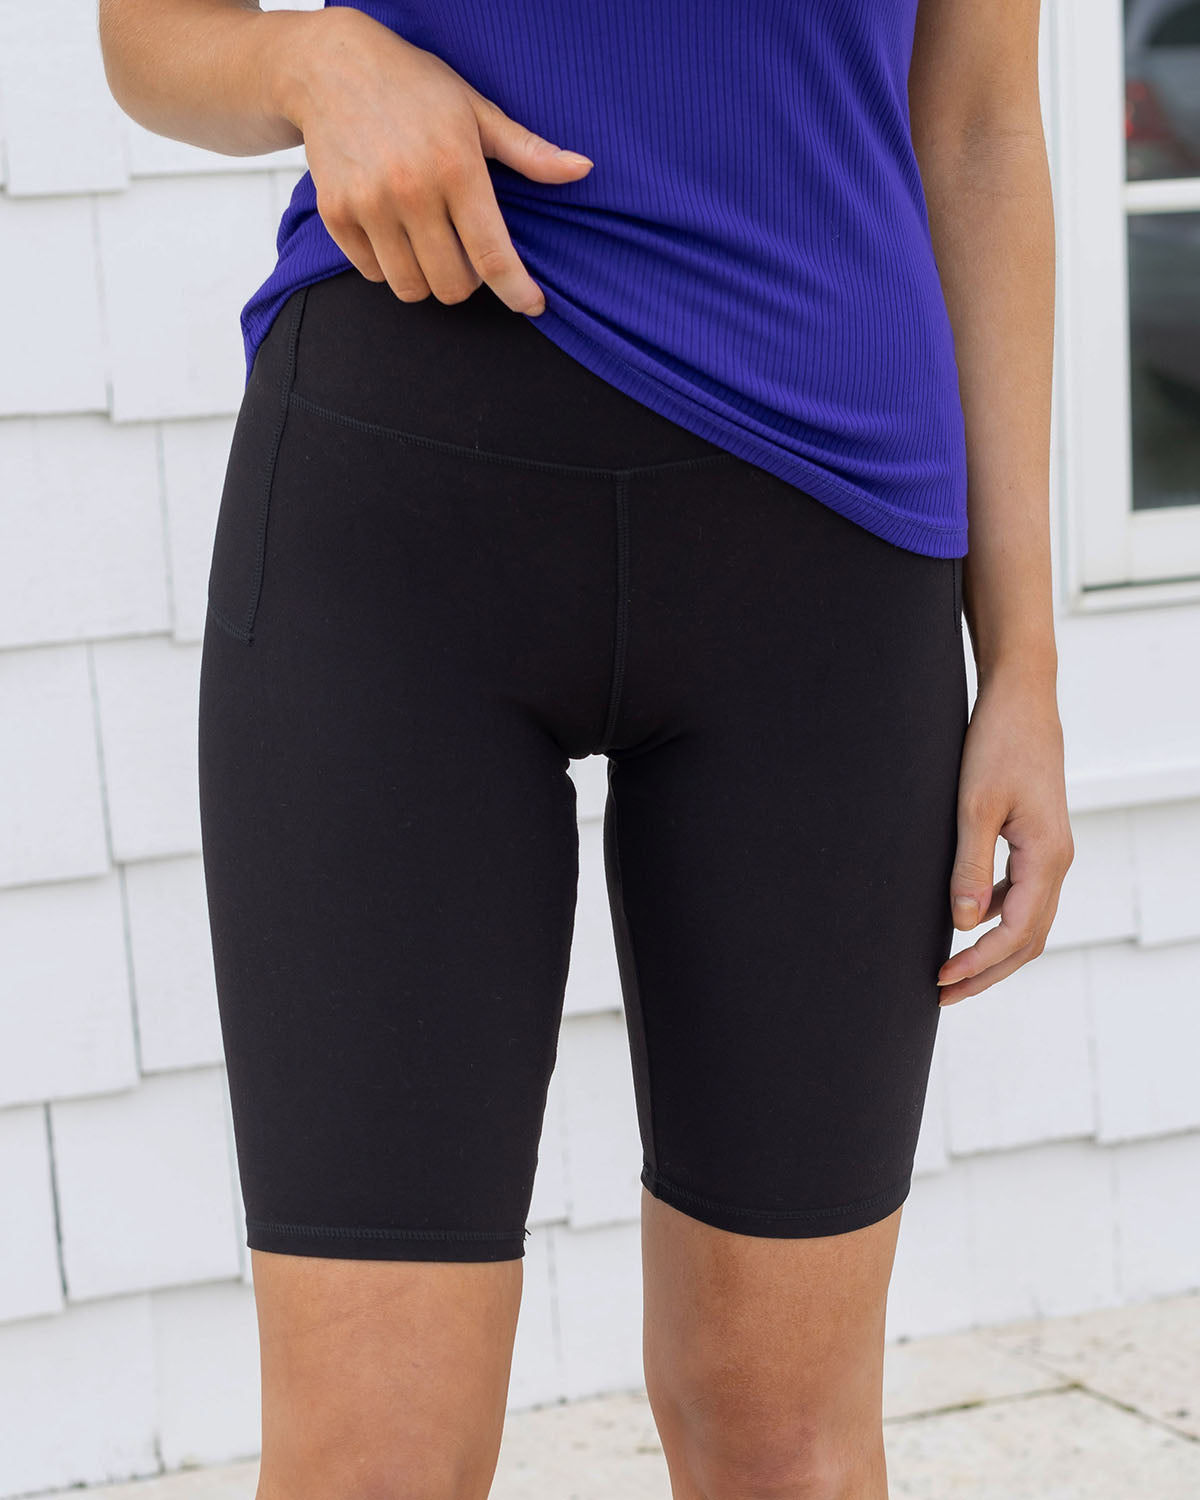 Daily Pocket Biker Shorts - 7 or 11 - Grace and Lace